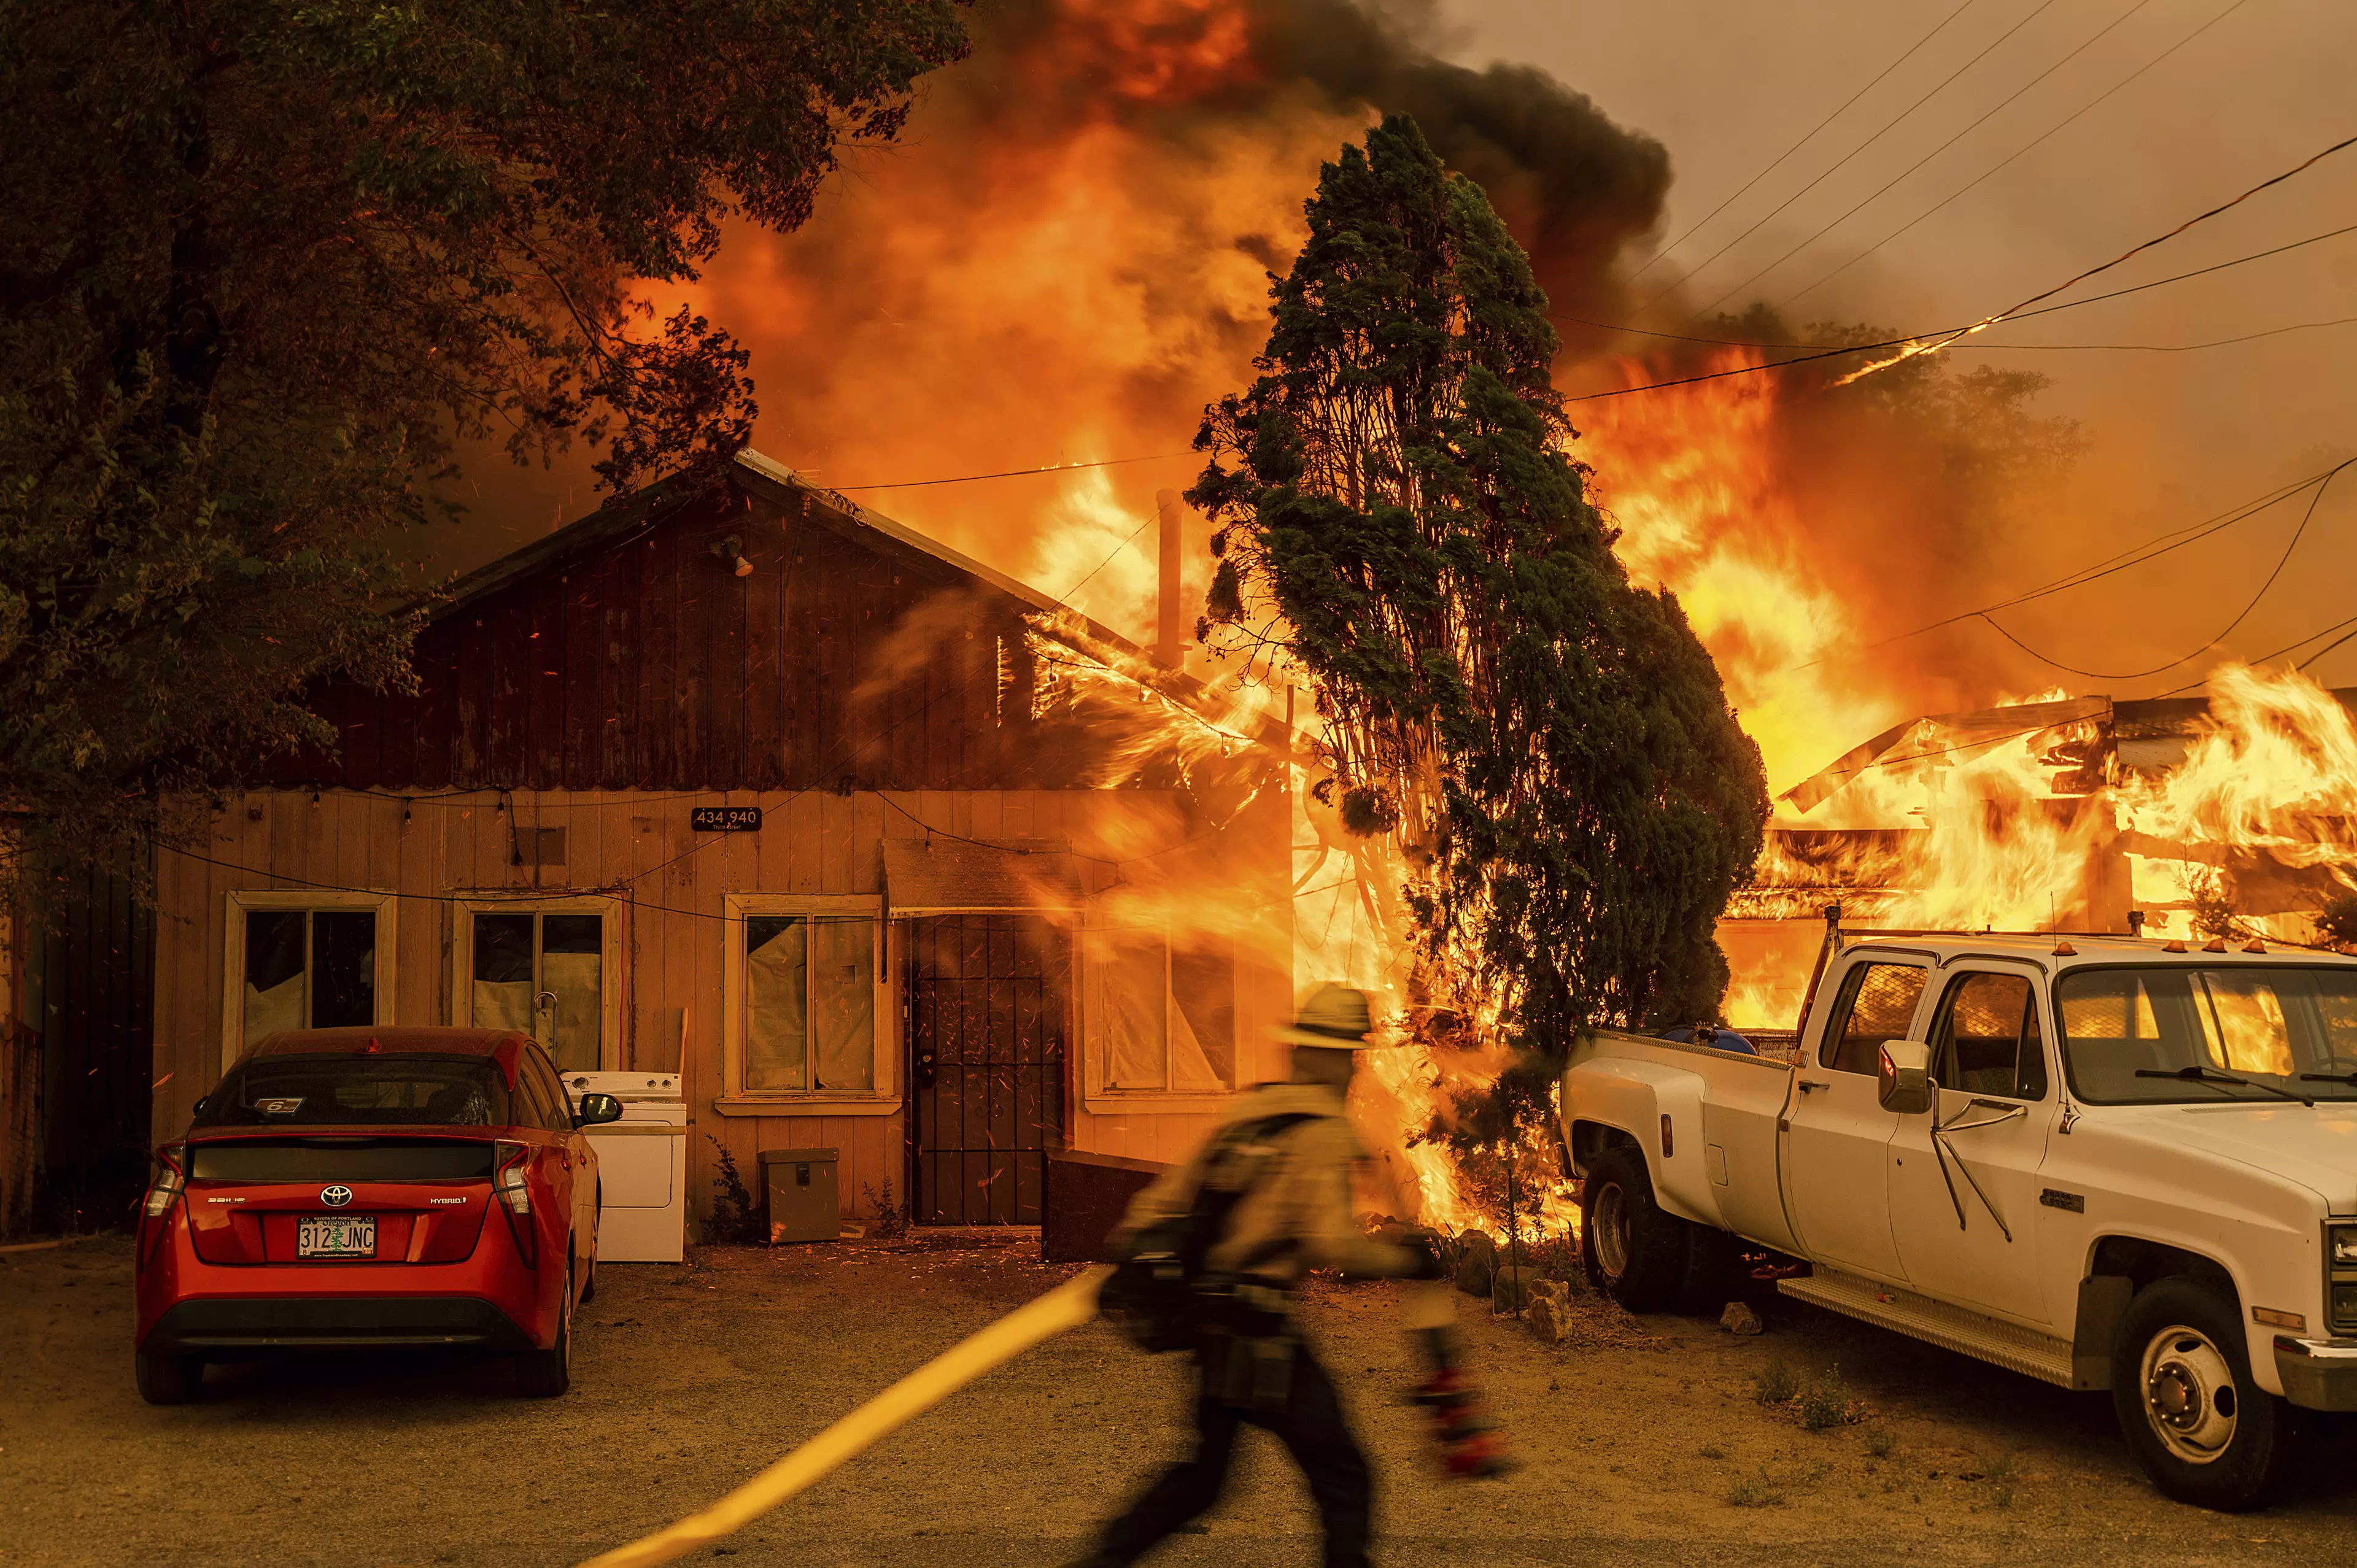 A wildfire has raged through northern California.